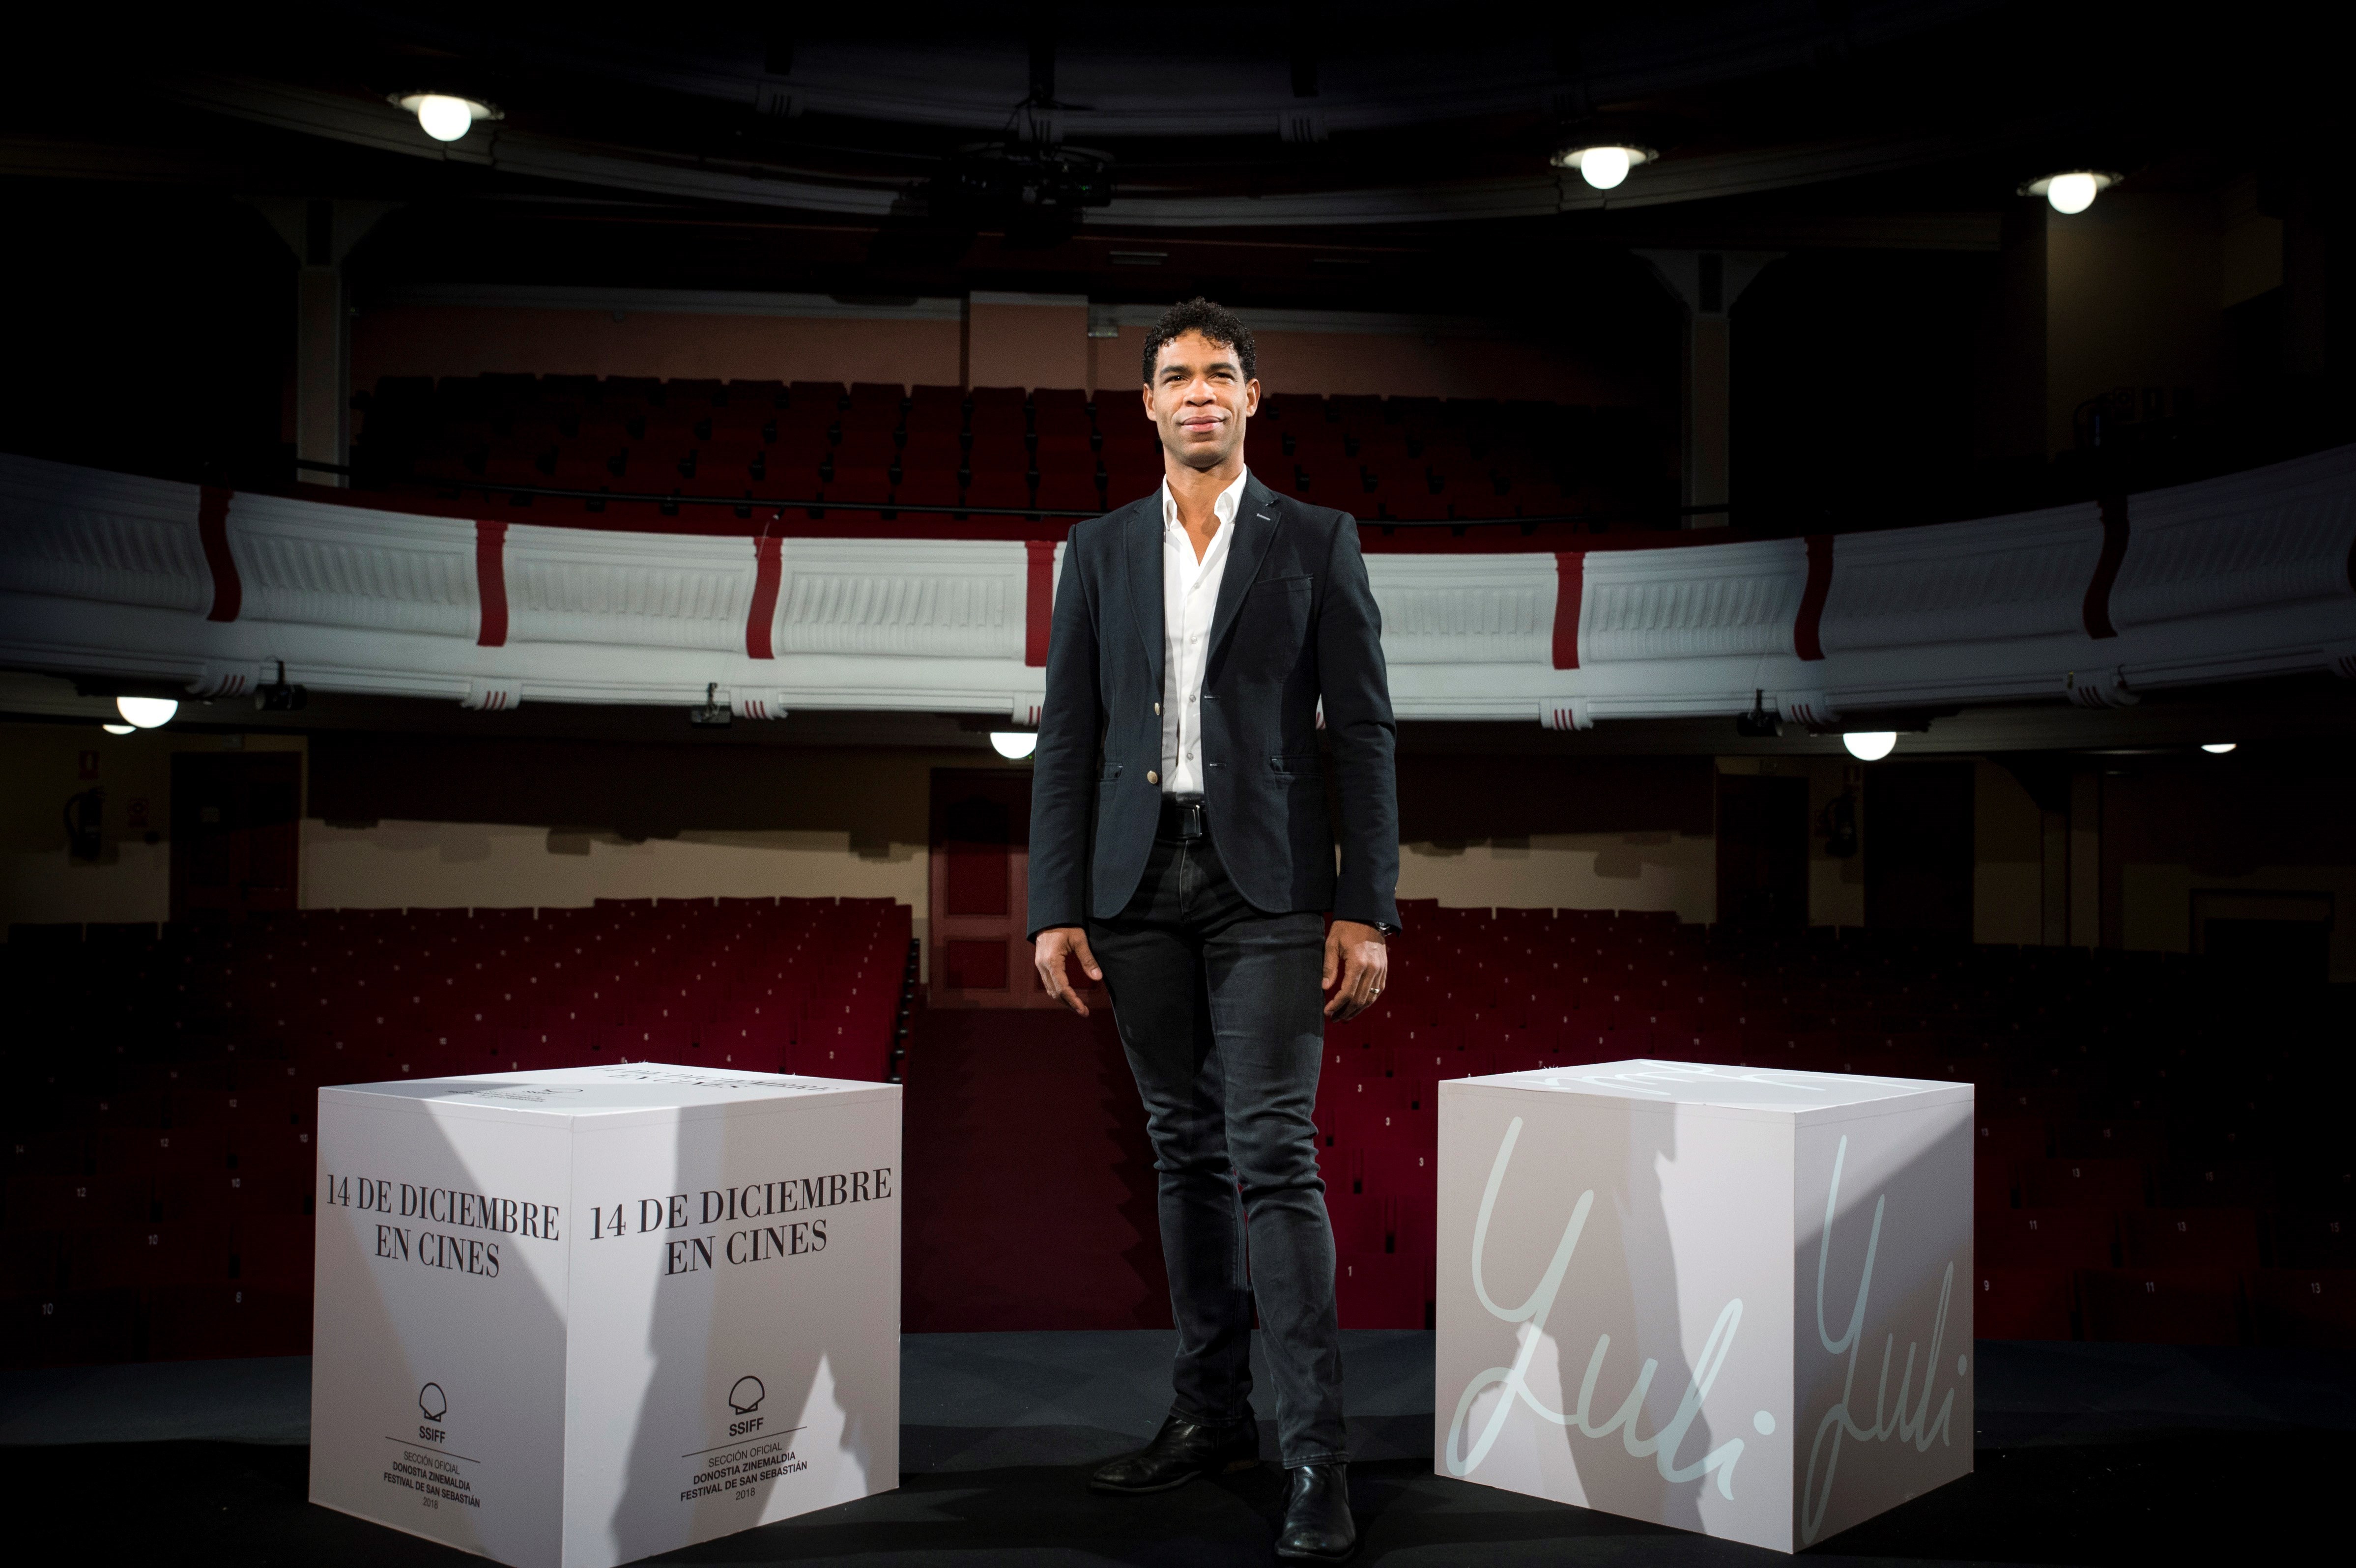 Cuban ballet dancer, writer and cast member Carlos Acosta poses during a photocall for the movie 'Yuli' in Madrid, Spain, Nov. 26, 2018. EPA-EFE/Luca Piergiovanni